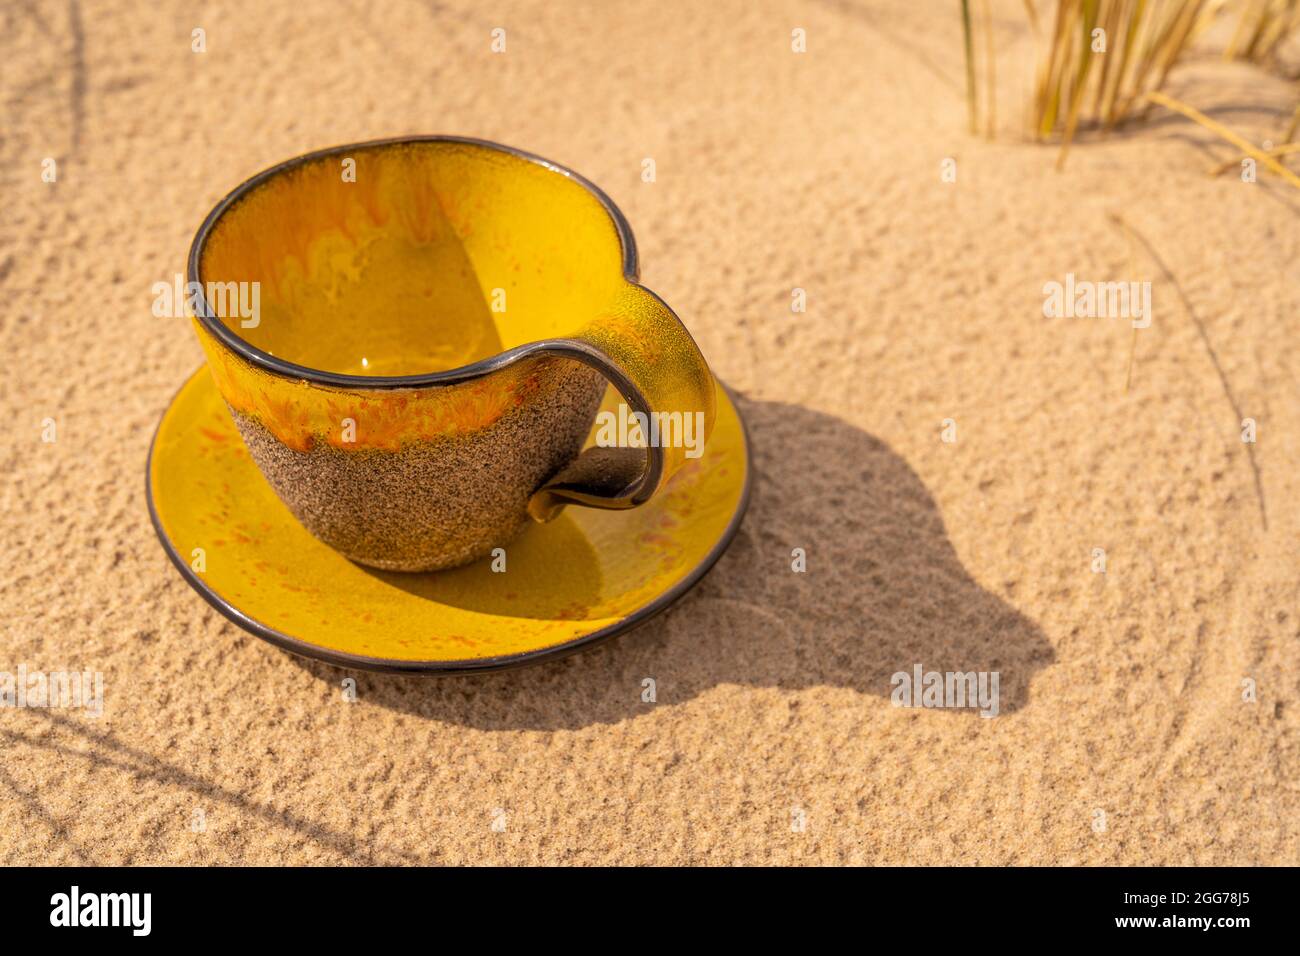 A clay cup with yellow glass glaze and a matching saucer is placed in the beach sand.   Oblique views of the cup with a saucer. Stock Photo